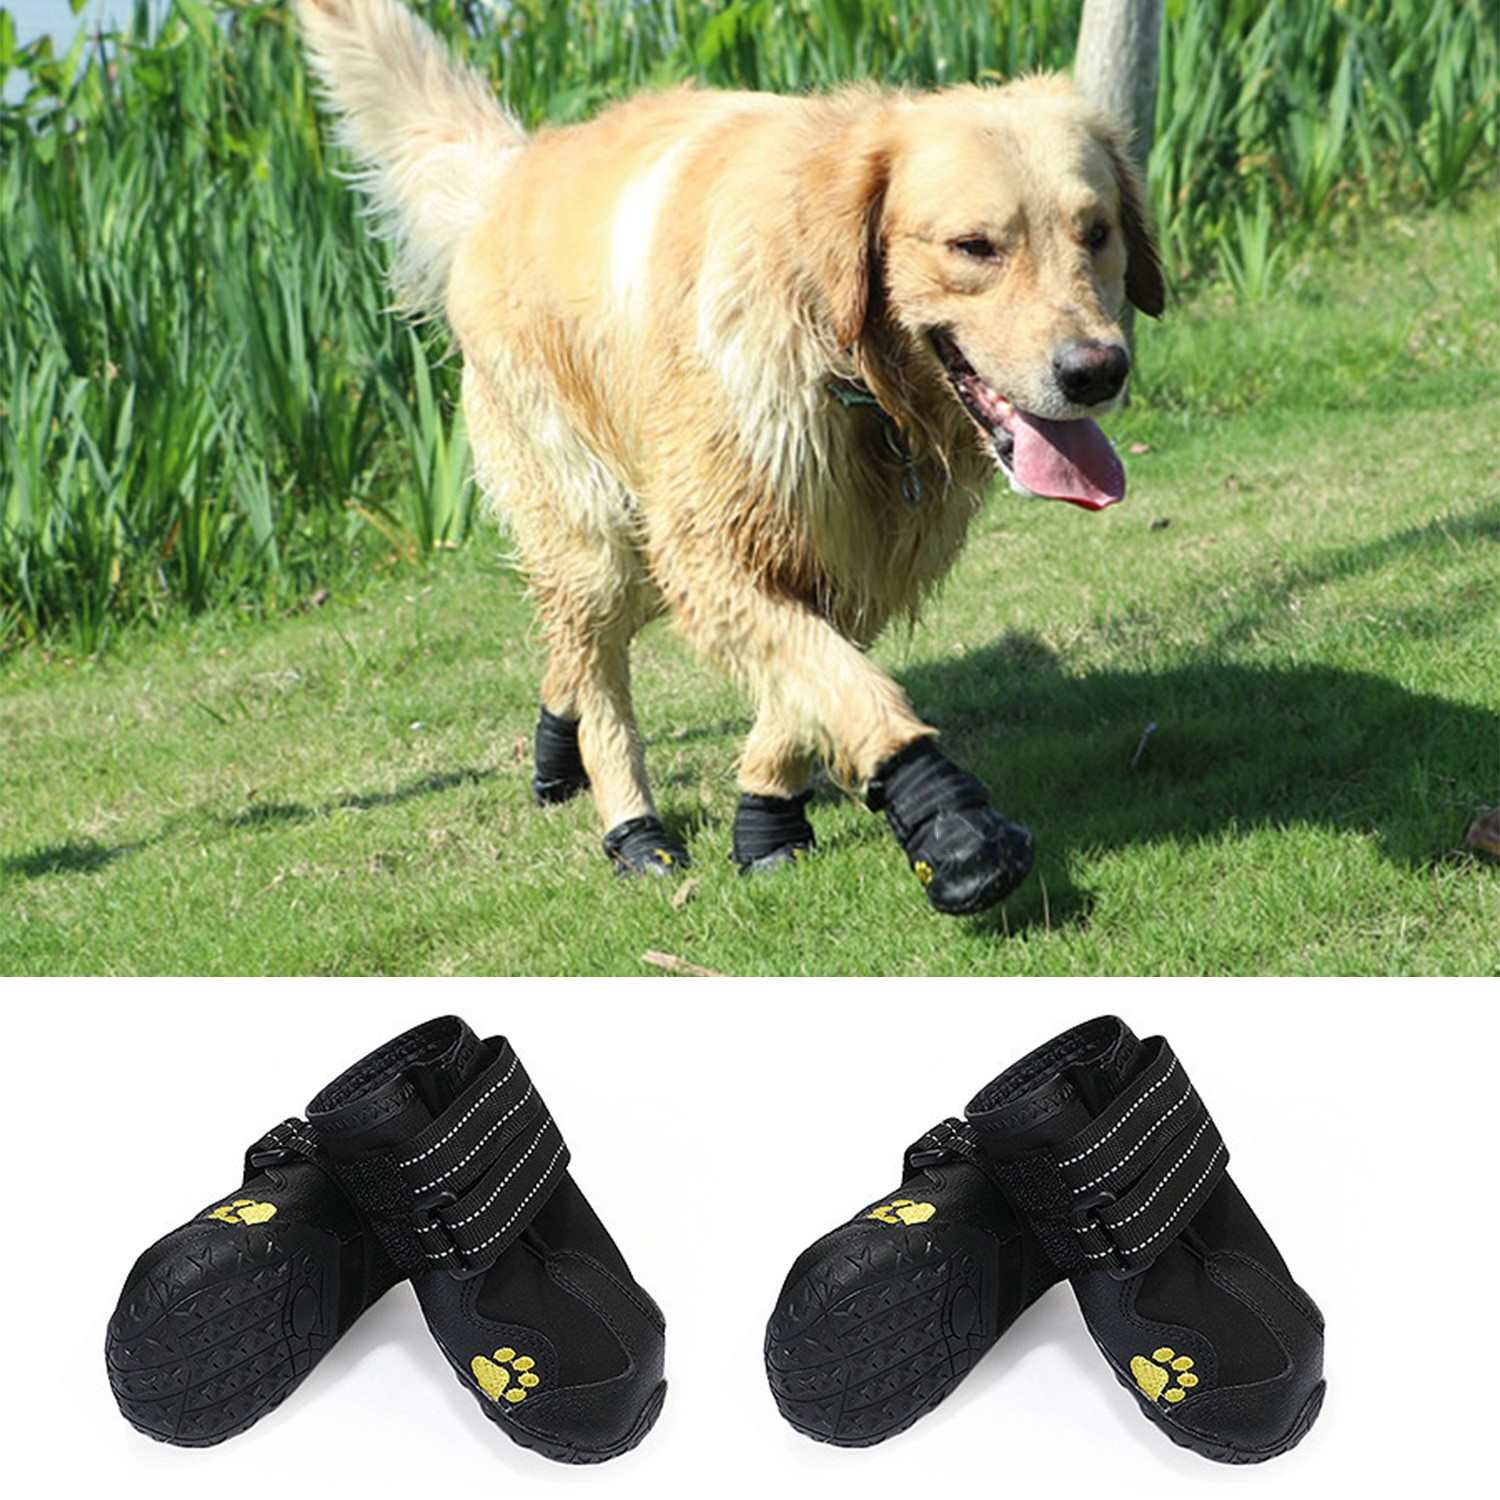 shoes for dogs near me